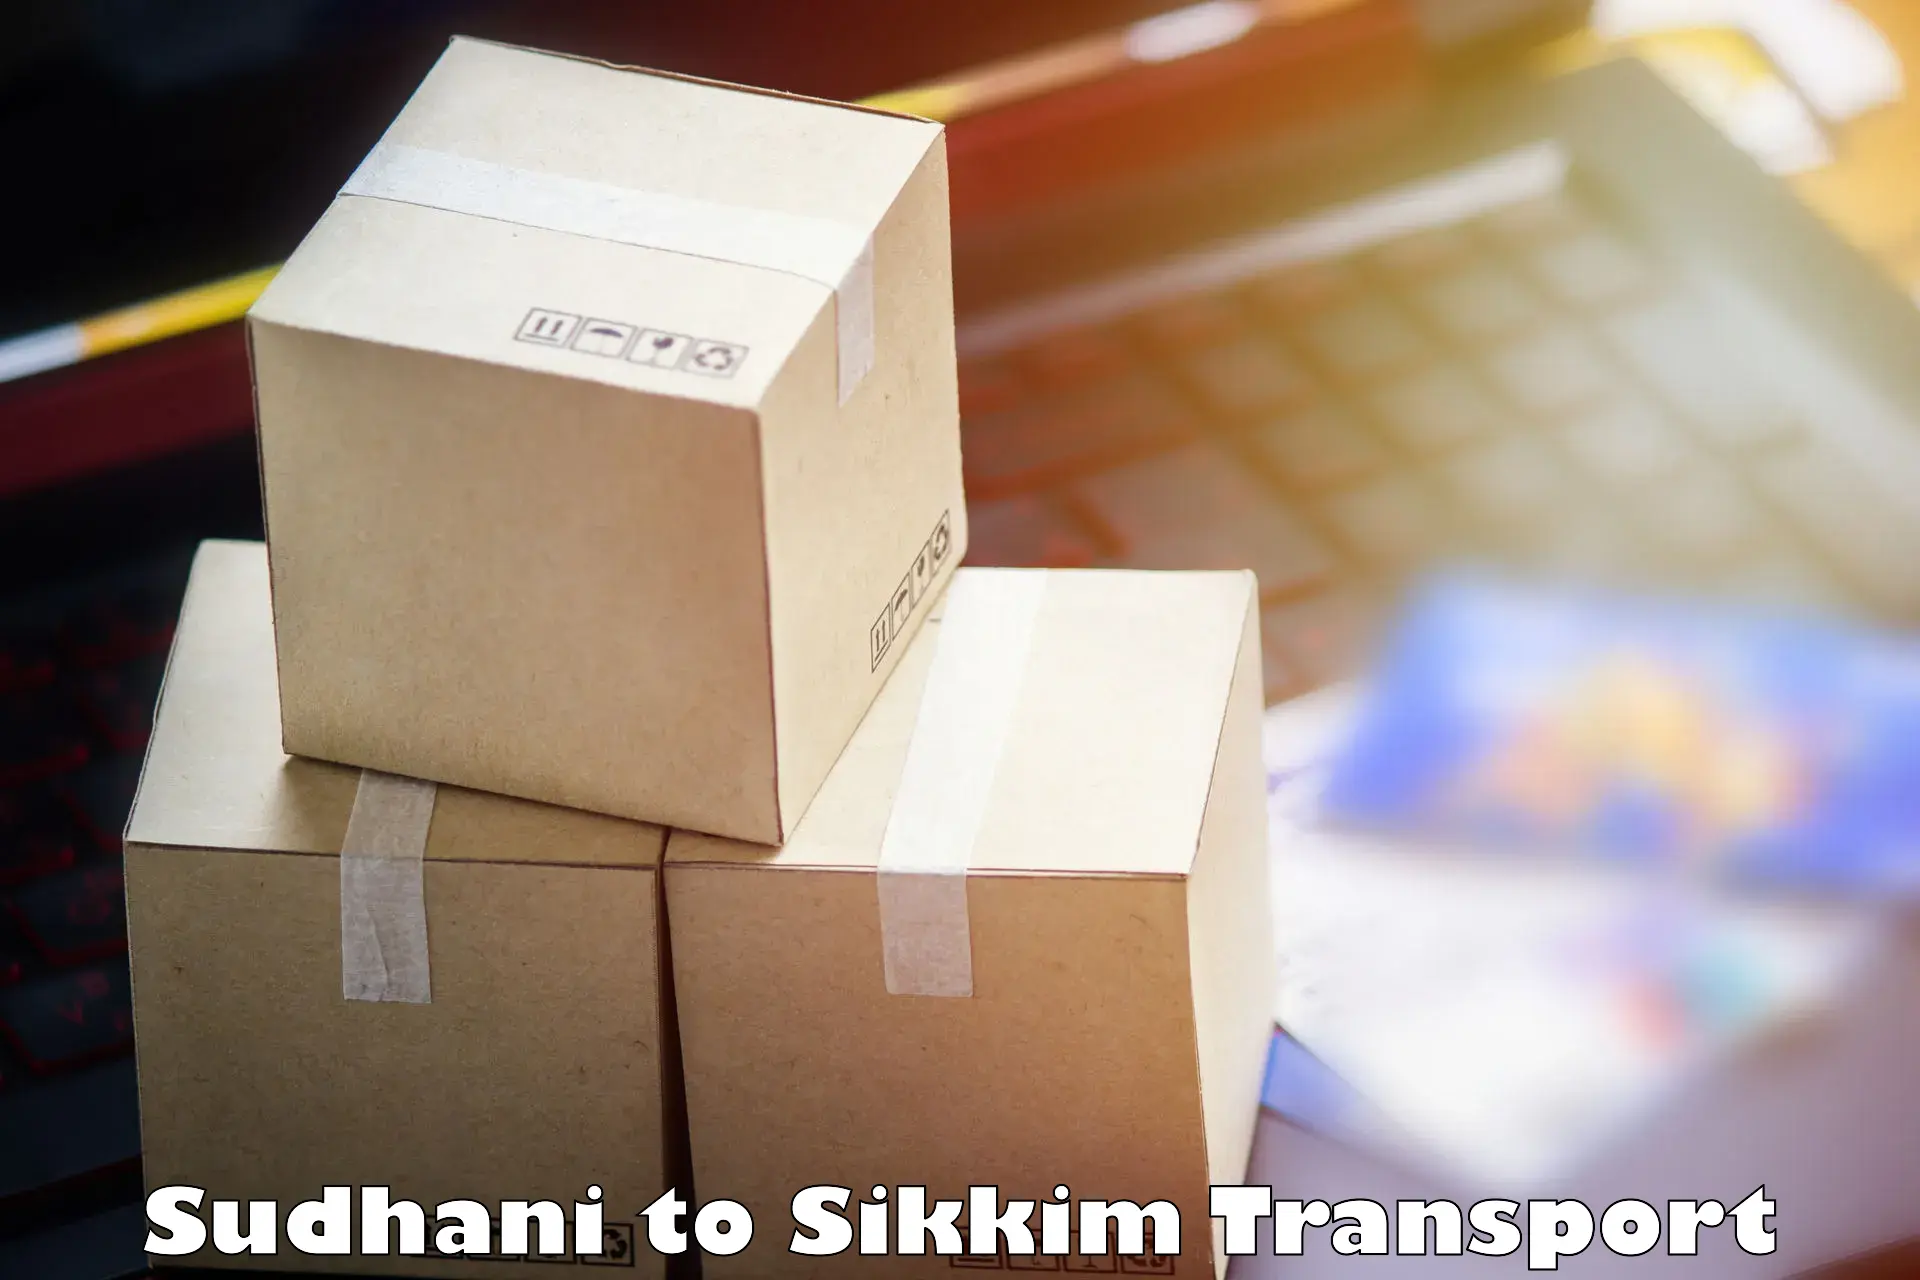 Online transport Sudhani to East Sikkim